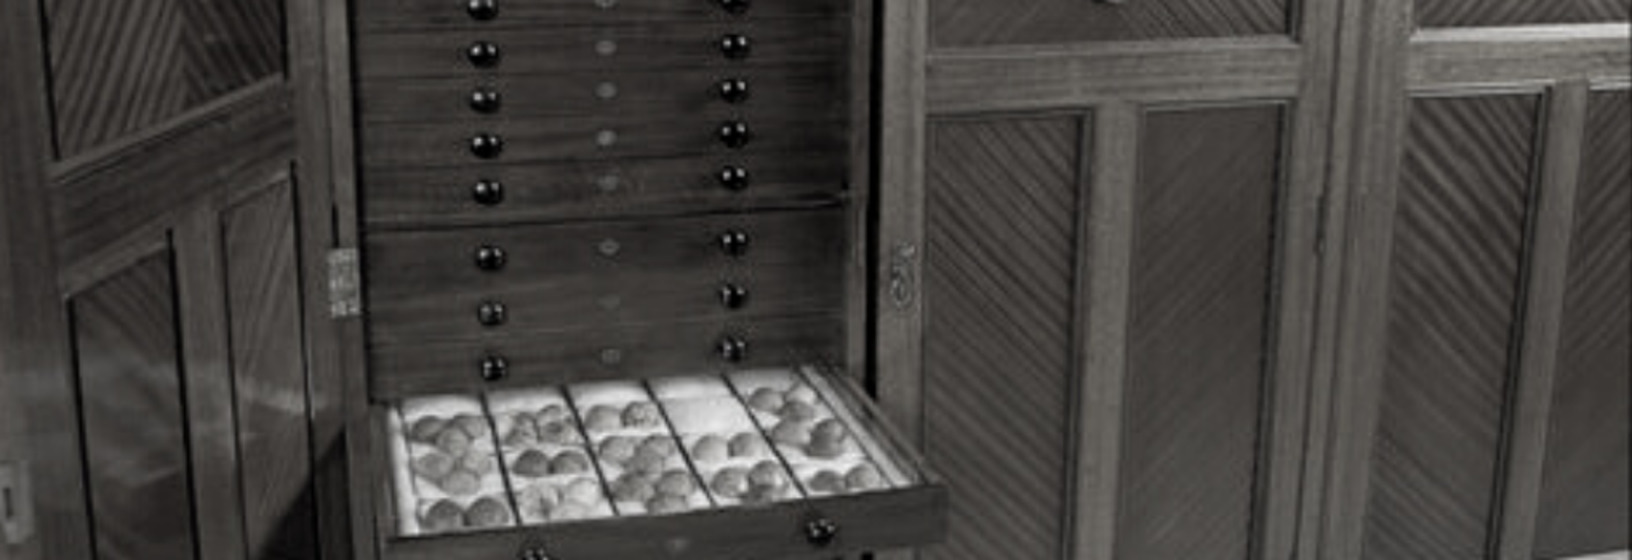 bird egg specimens are contained in a grand wooden cabinet